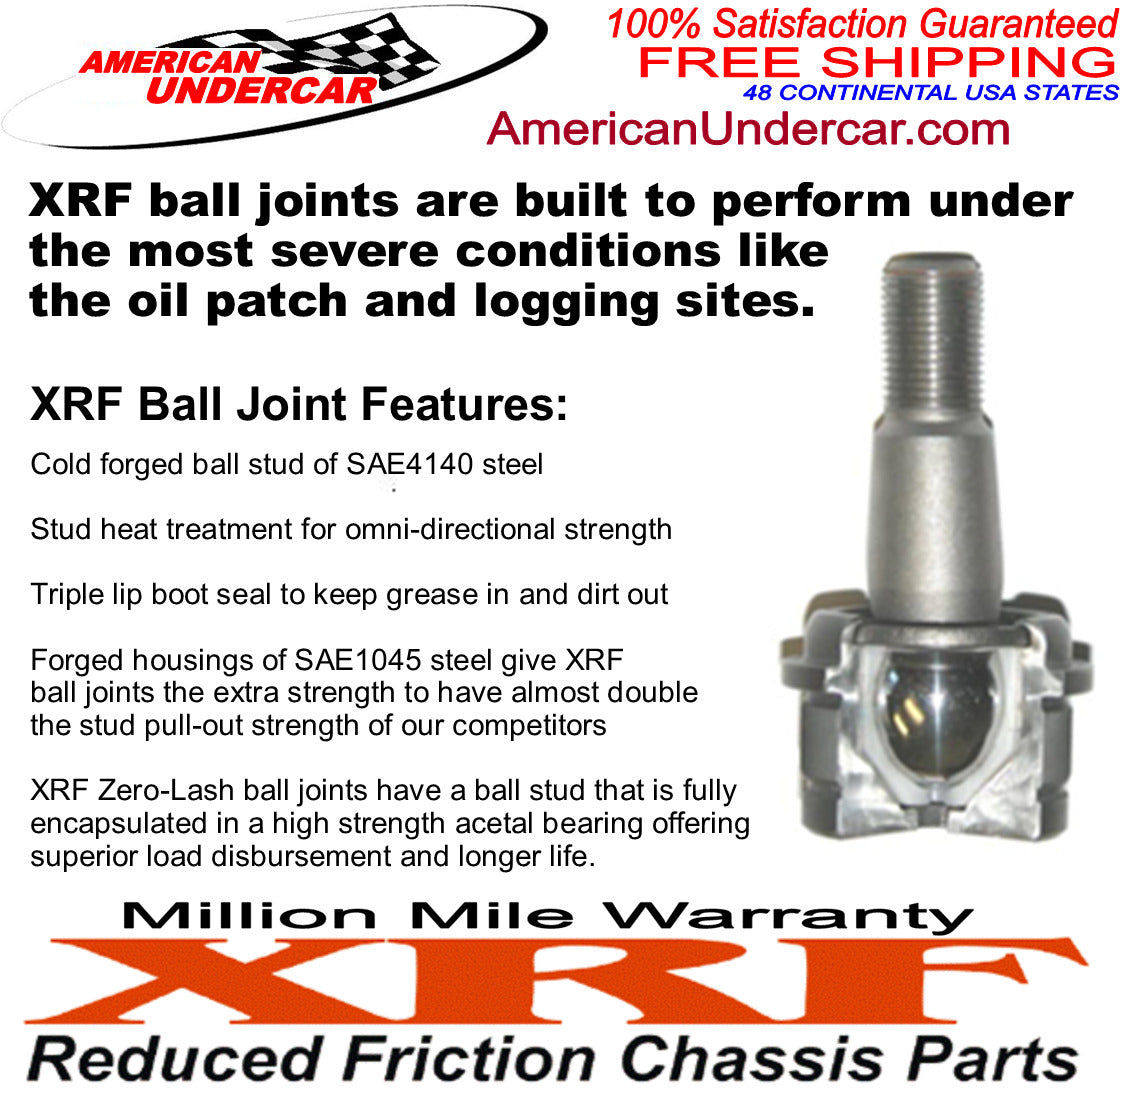 XRF Super Duty Ball Joint Steering and Suspension Kit for 2011-2016 Ford F250, F350 4x4 Narrow Frame